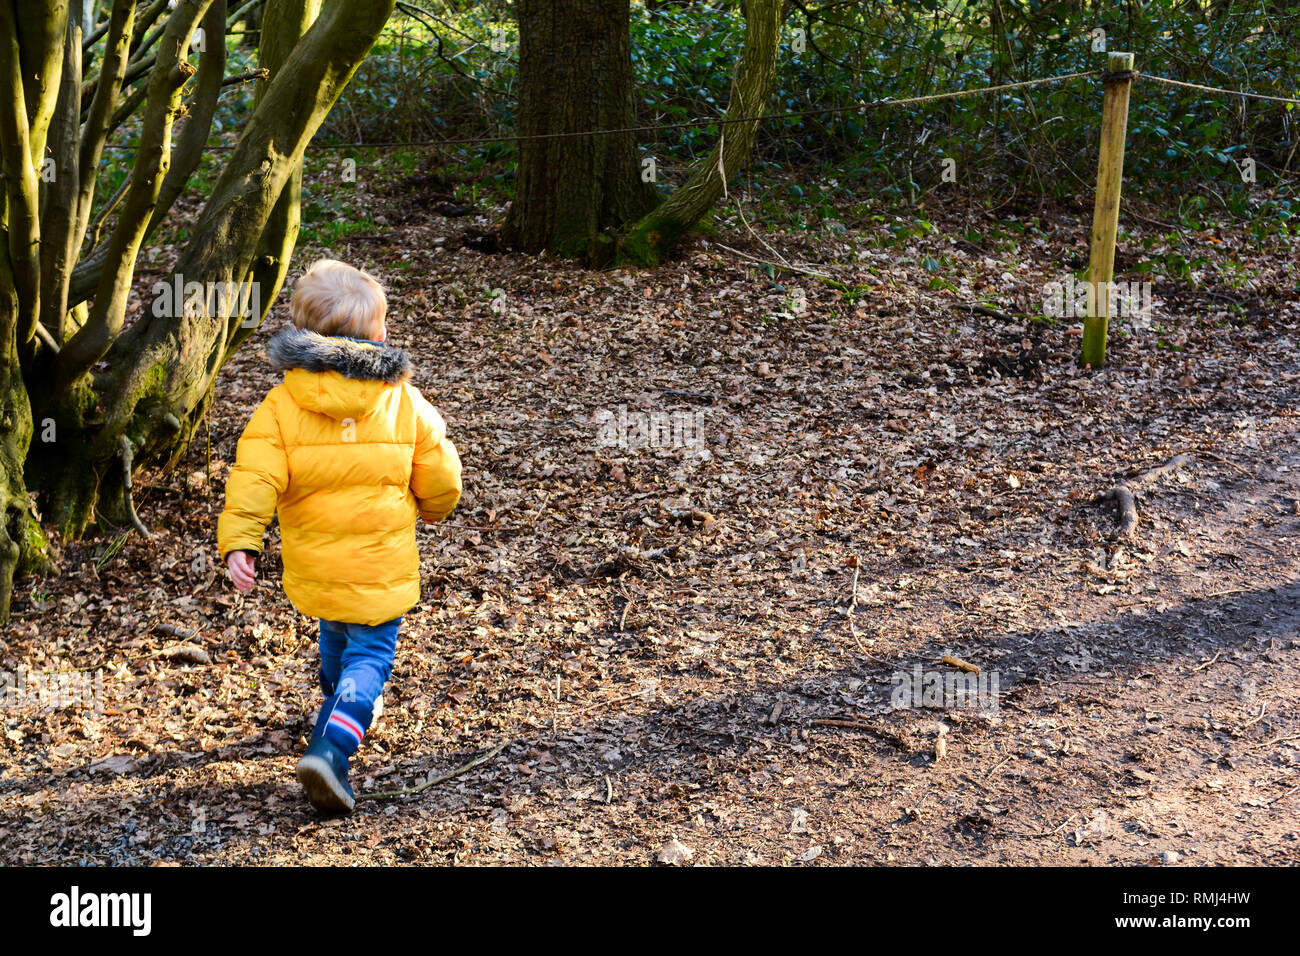 Young boy exploring outdoors and learning to climb trees Stock Photo